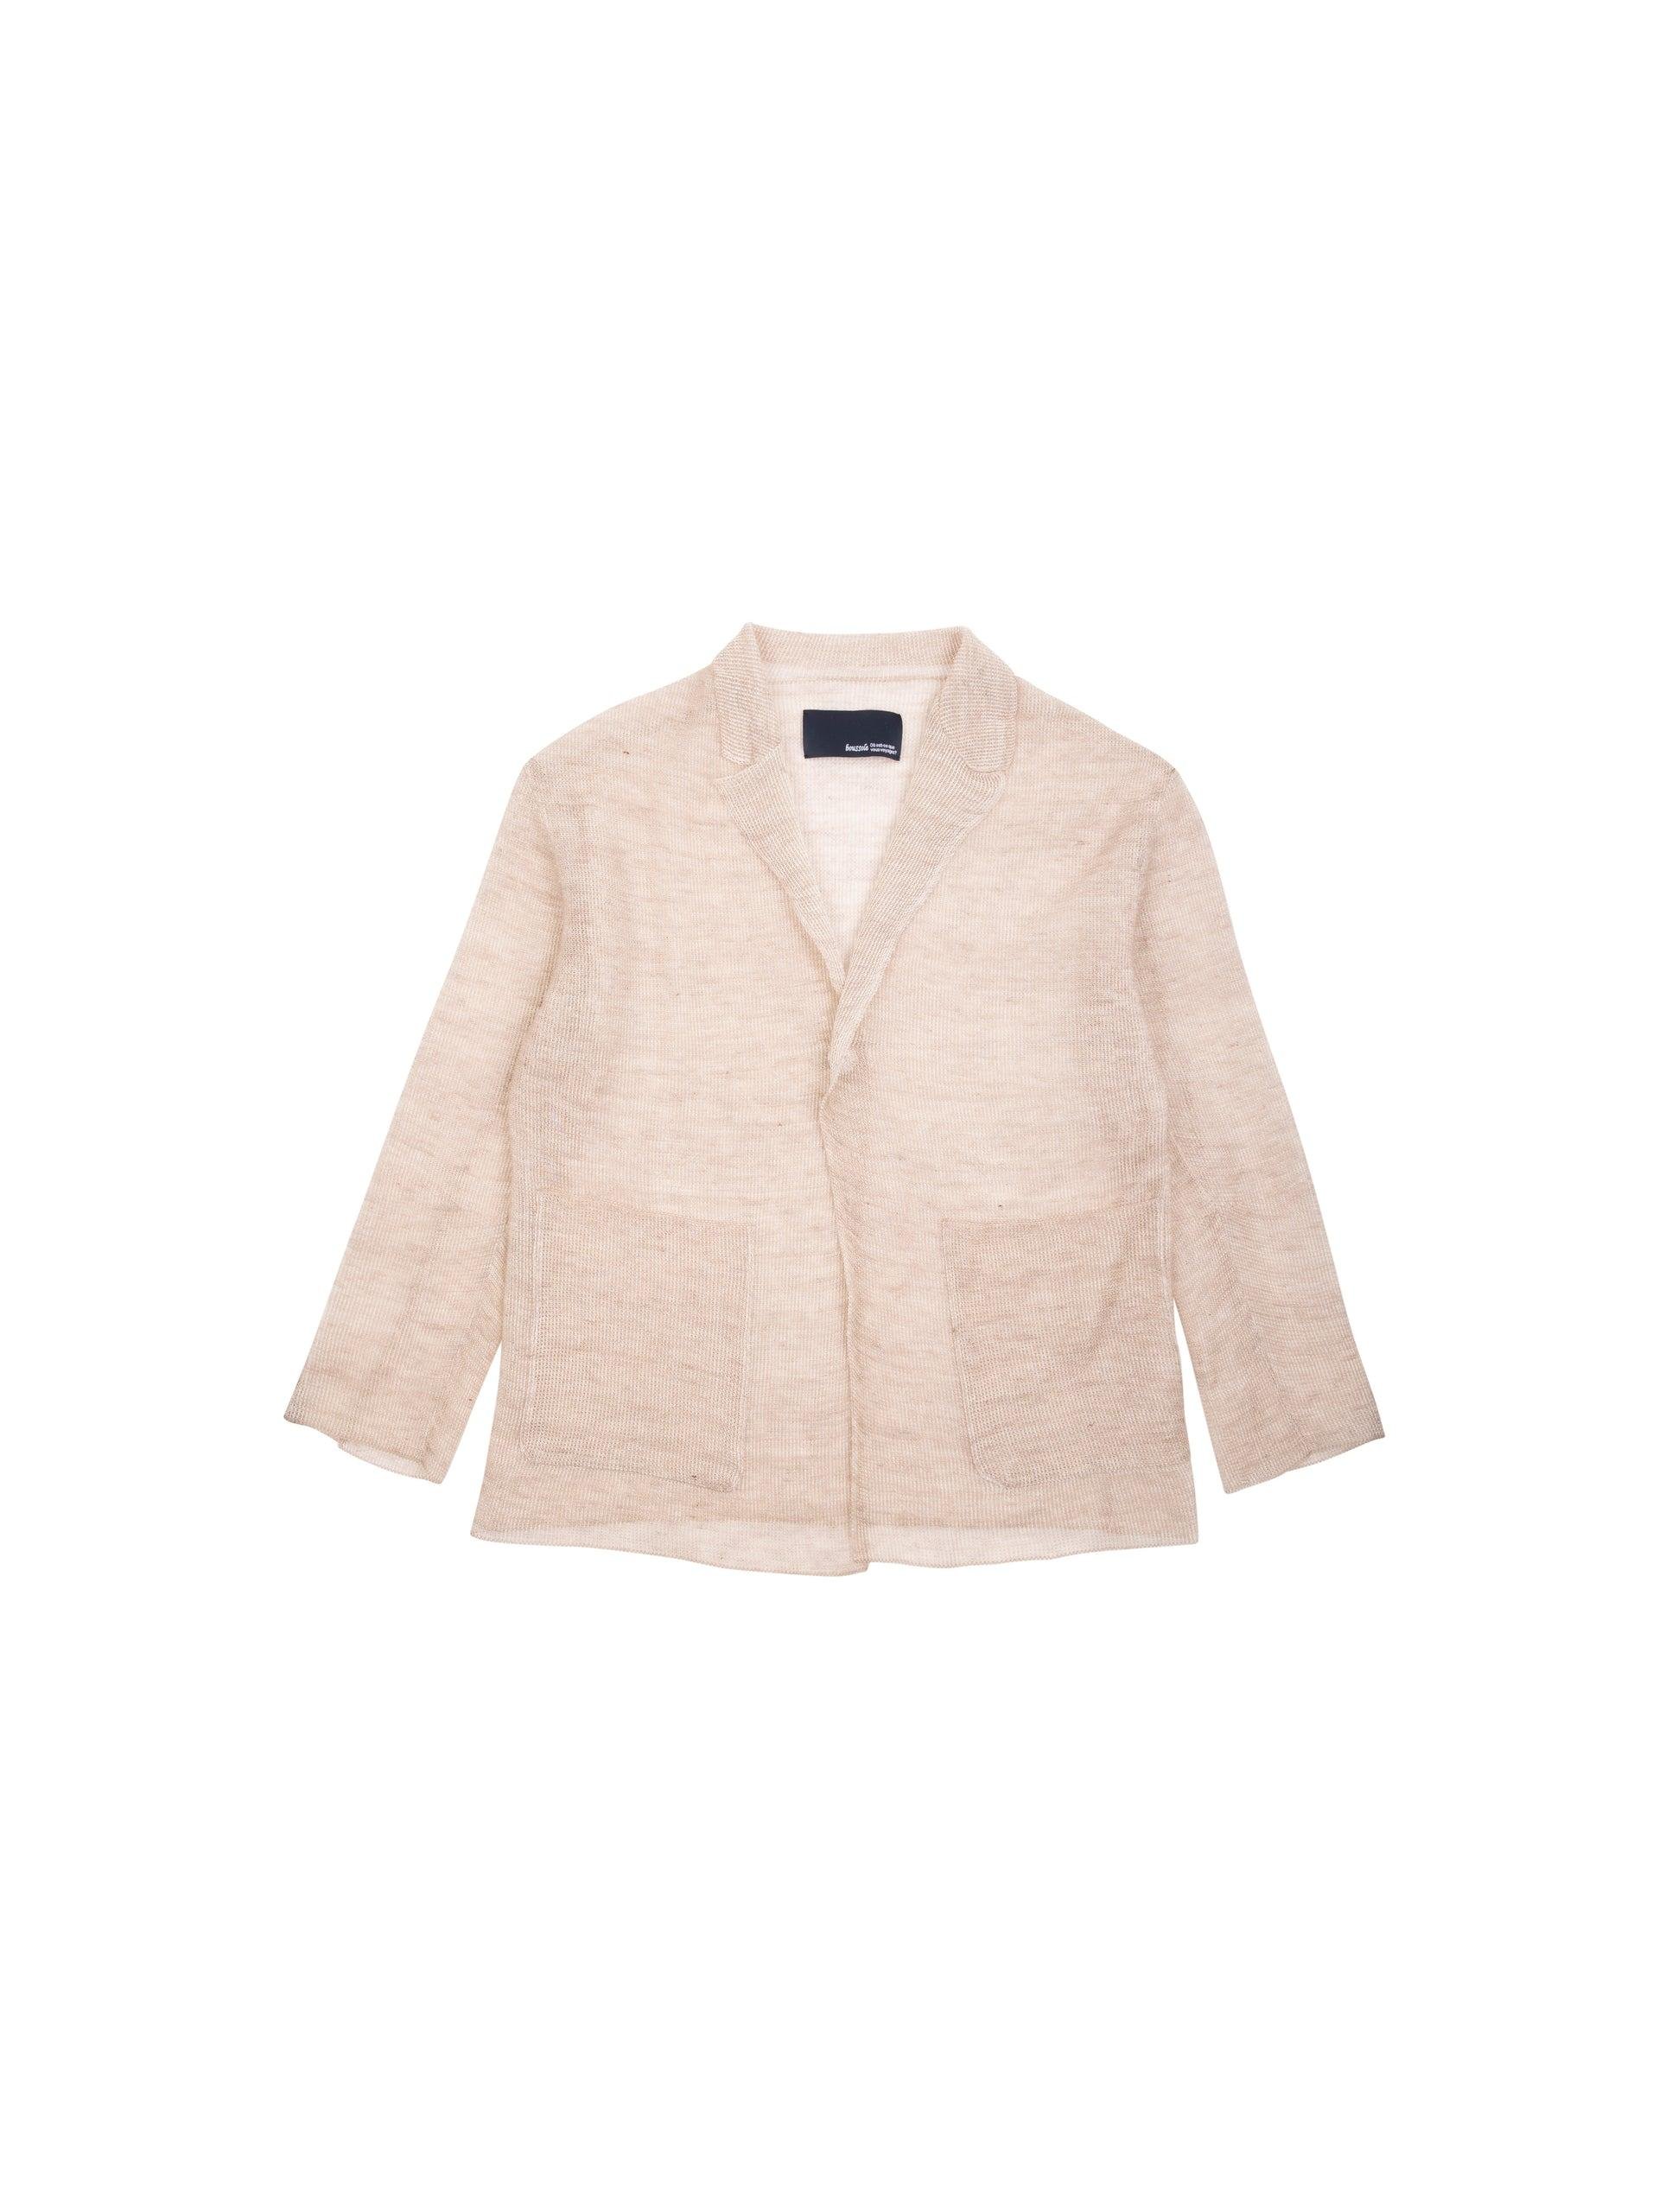 BOUSSOLE Airy Mesh Blazer by COCKTAIL